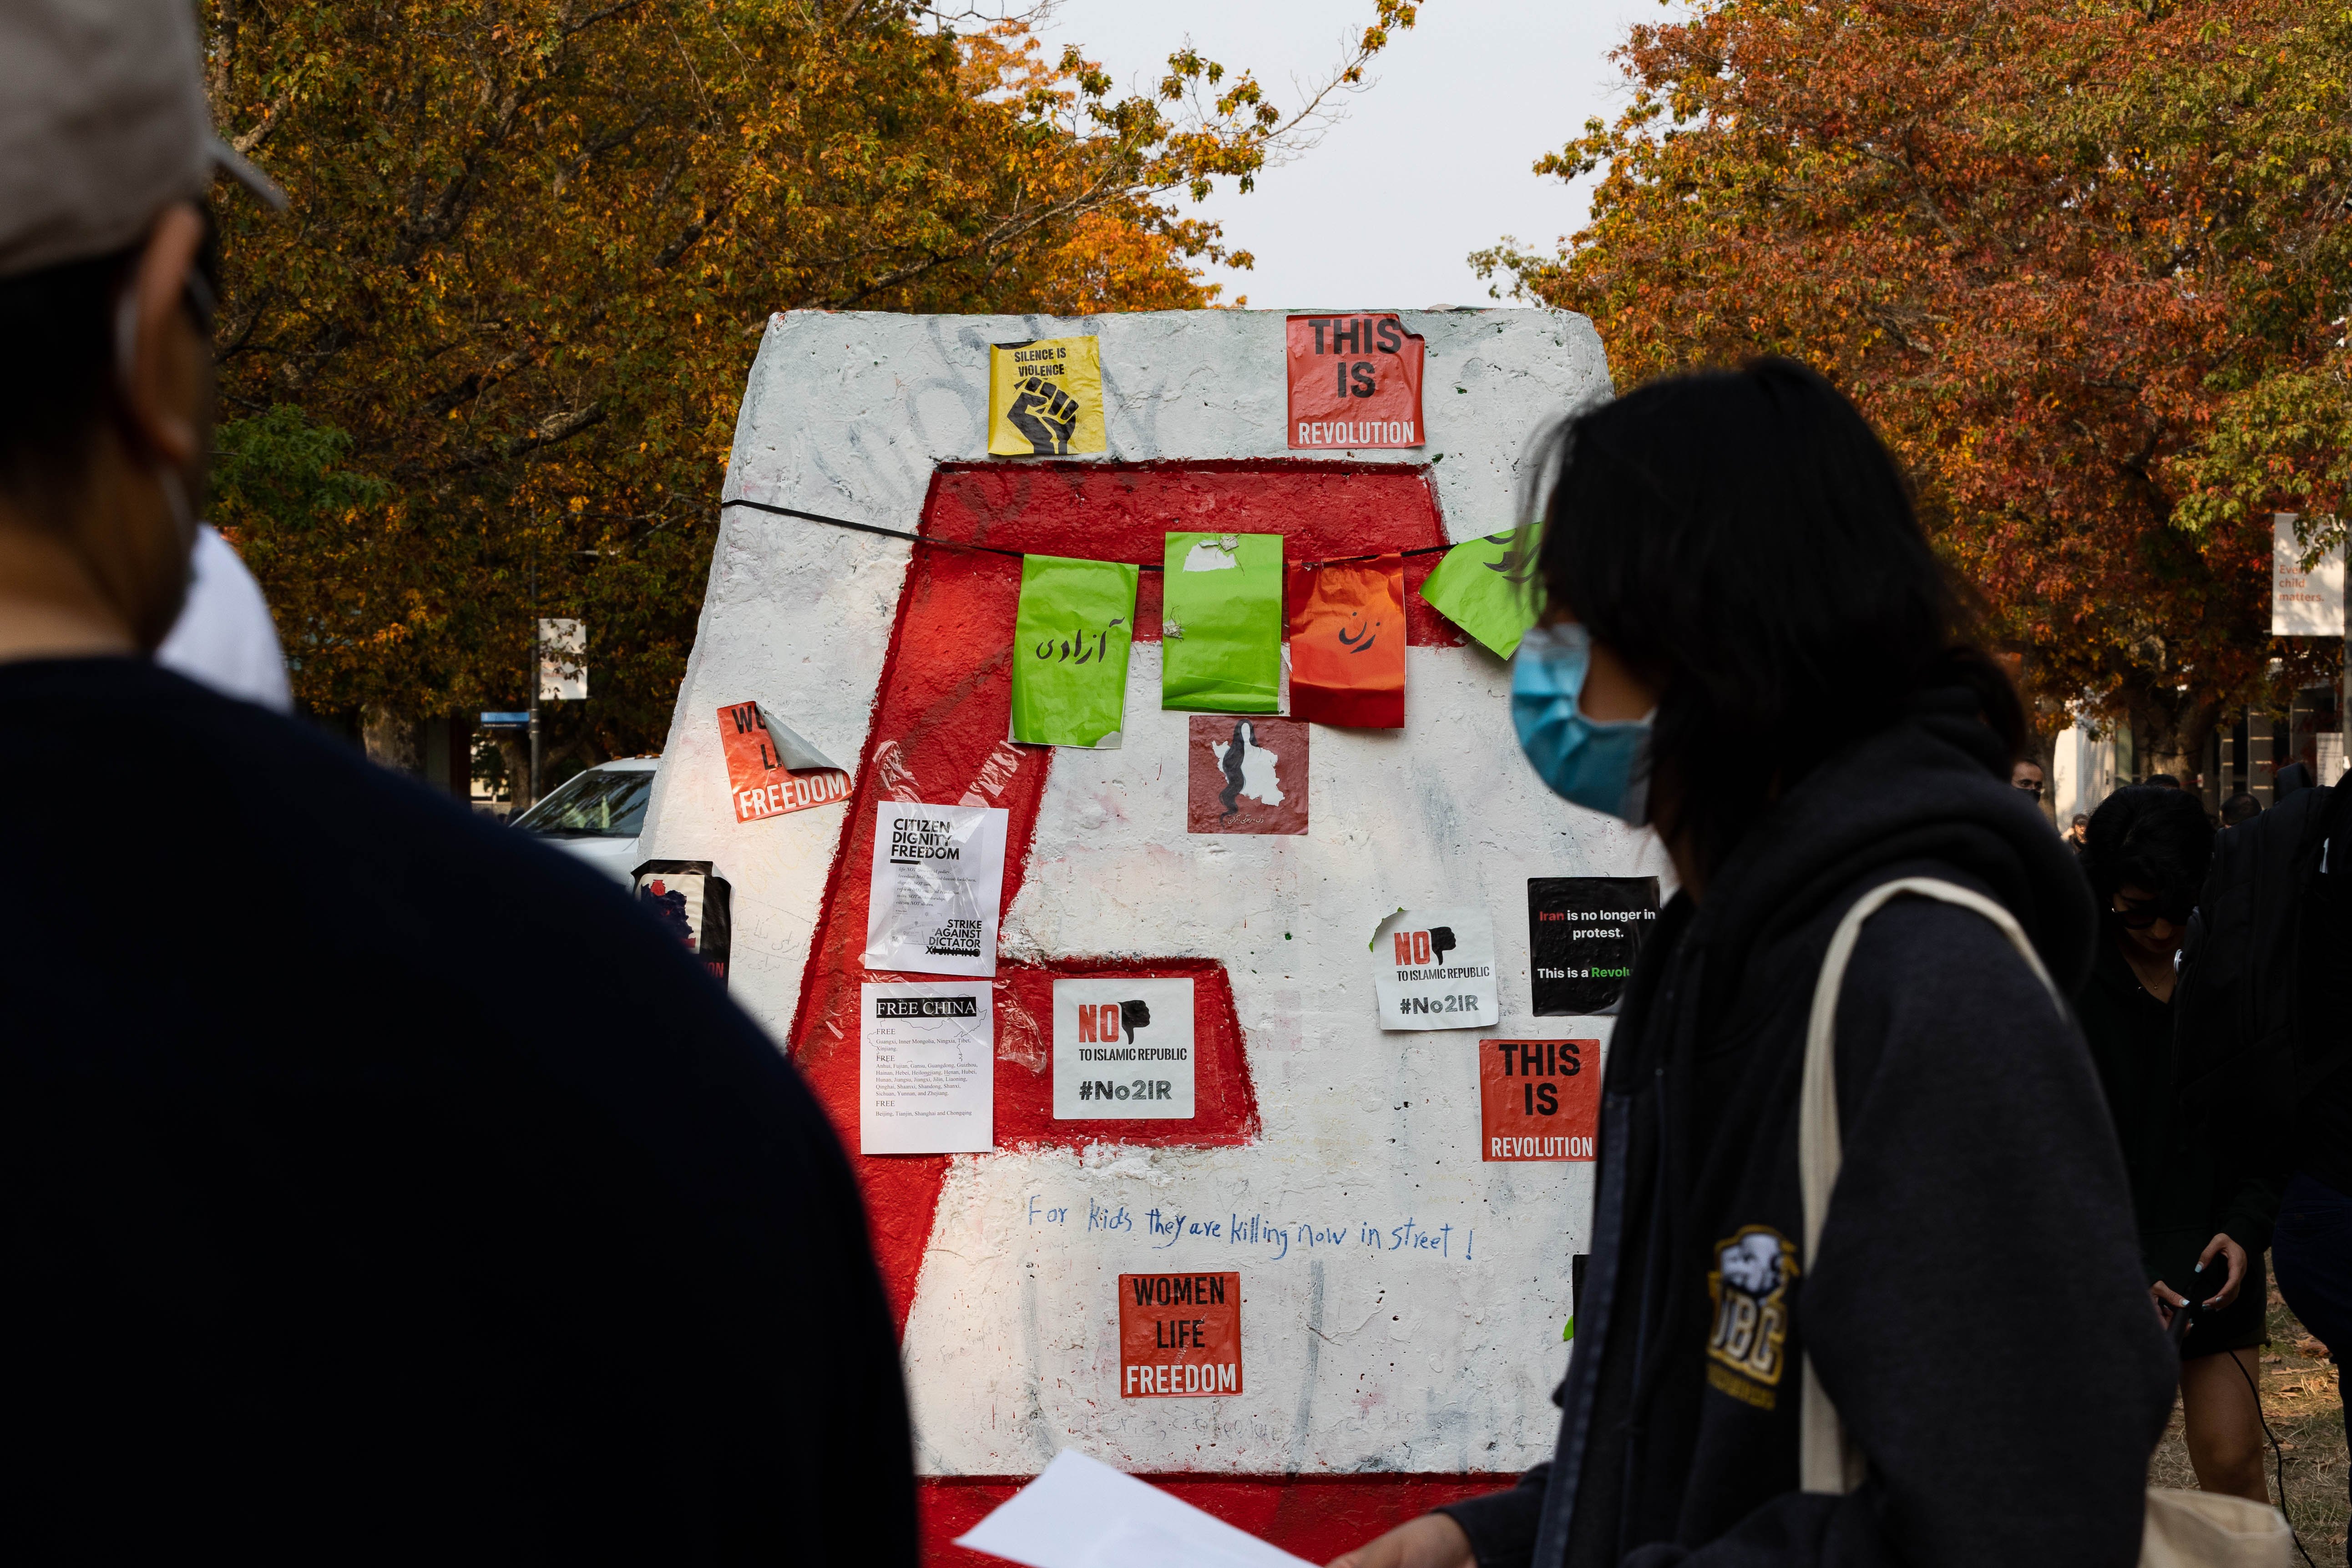 Messages and posters accumulate on the Engineering Cairn with each new protest.